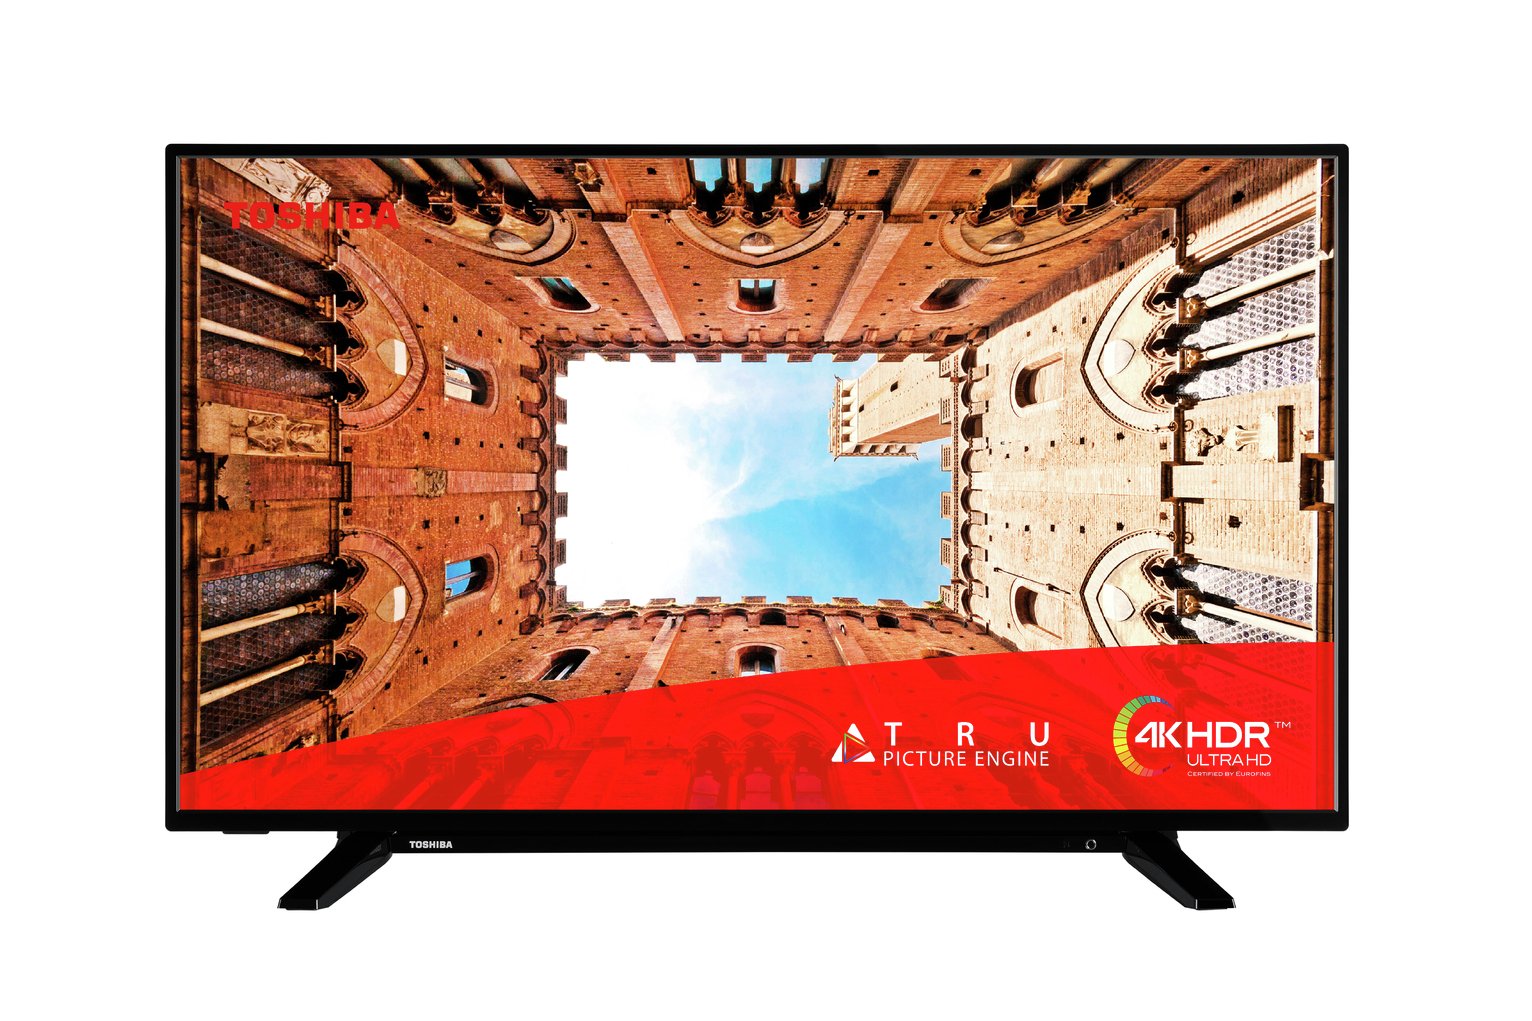 Toshiba 40 Inch Smart 4K Ultra HD LED TV with HDR Review